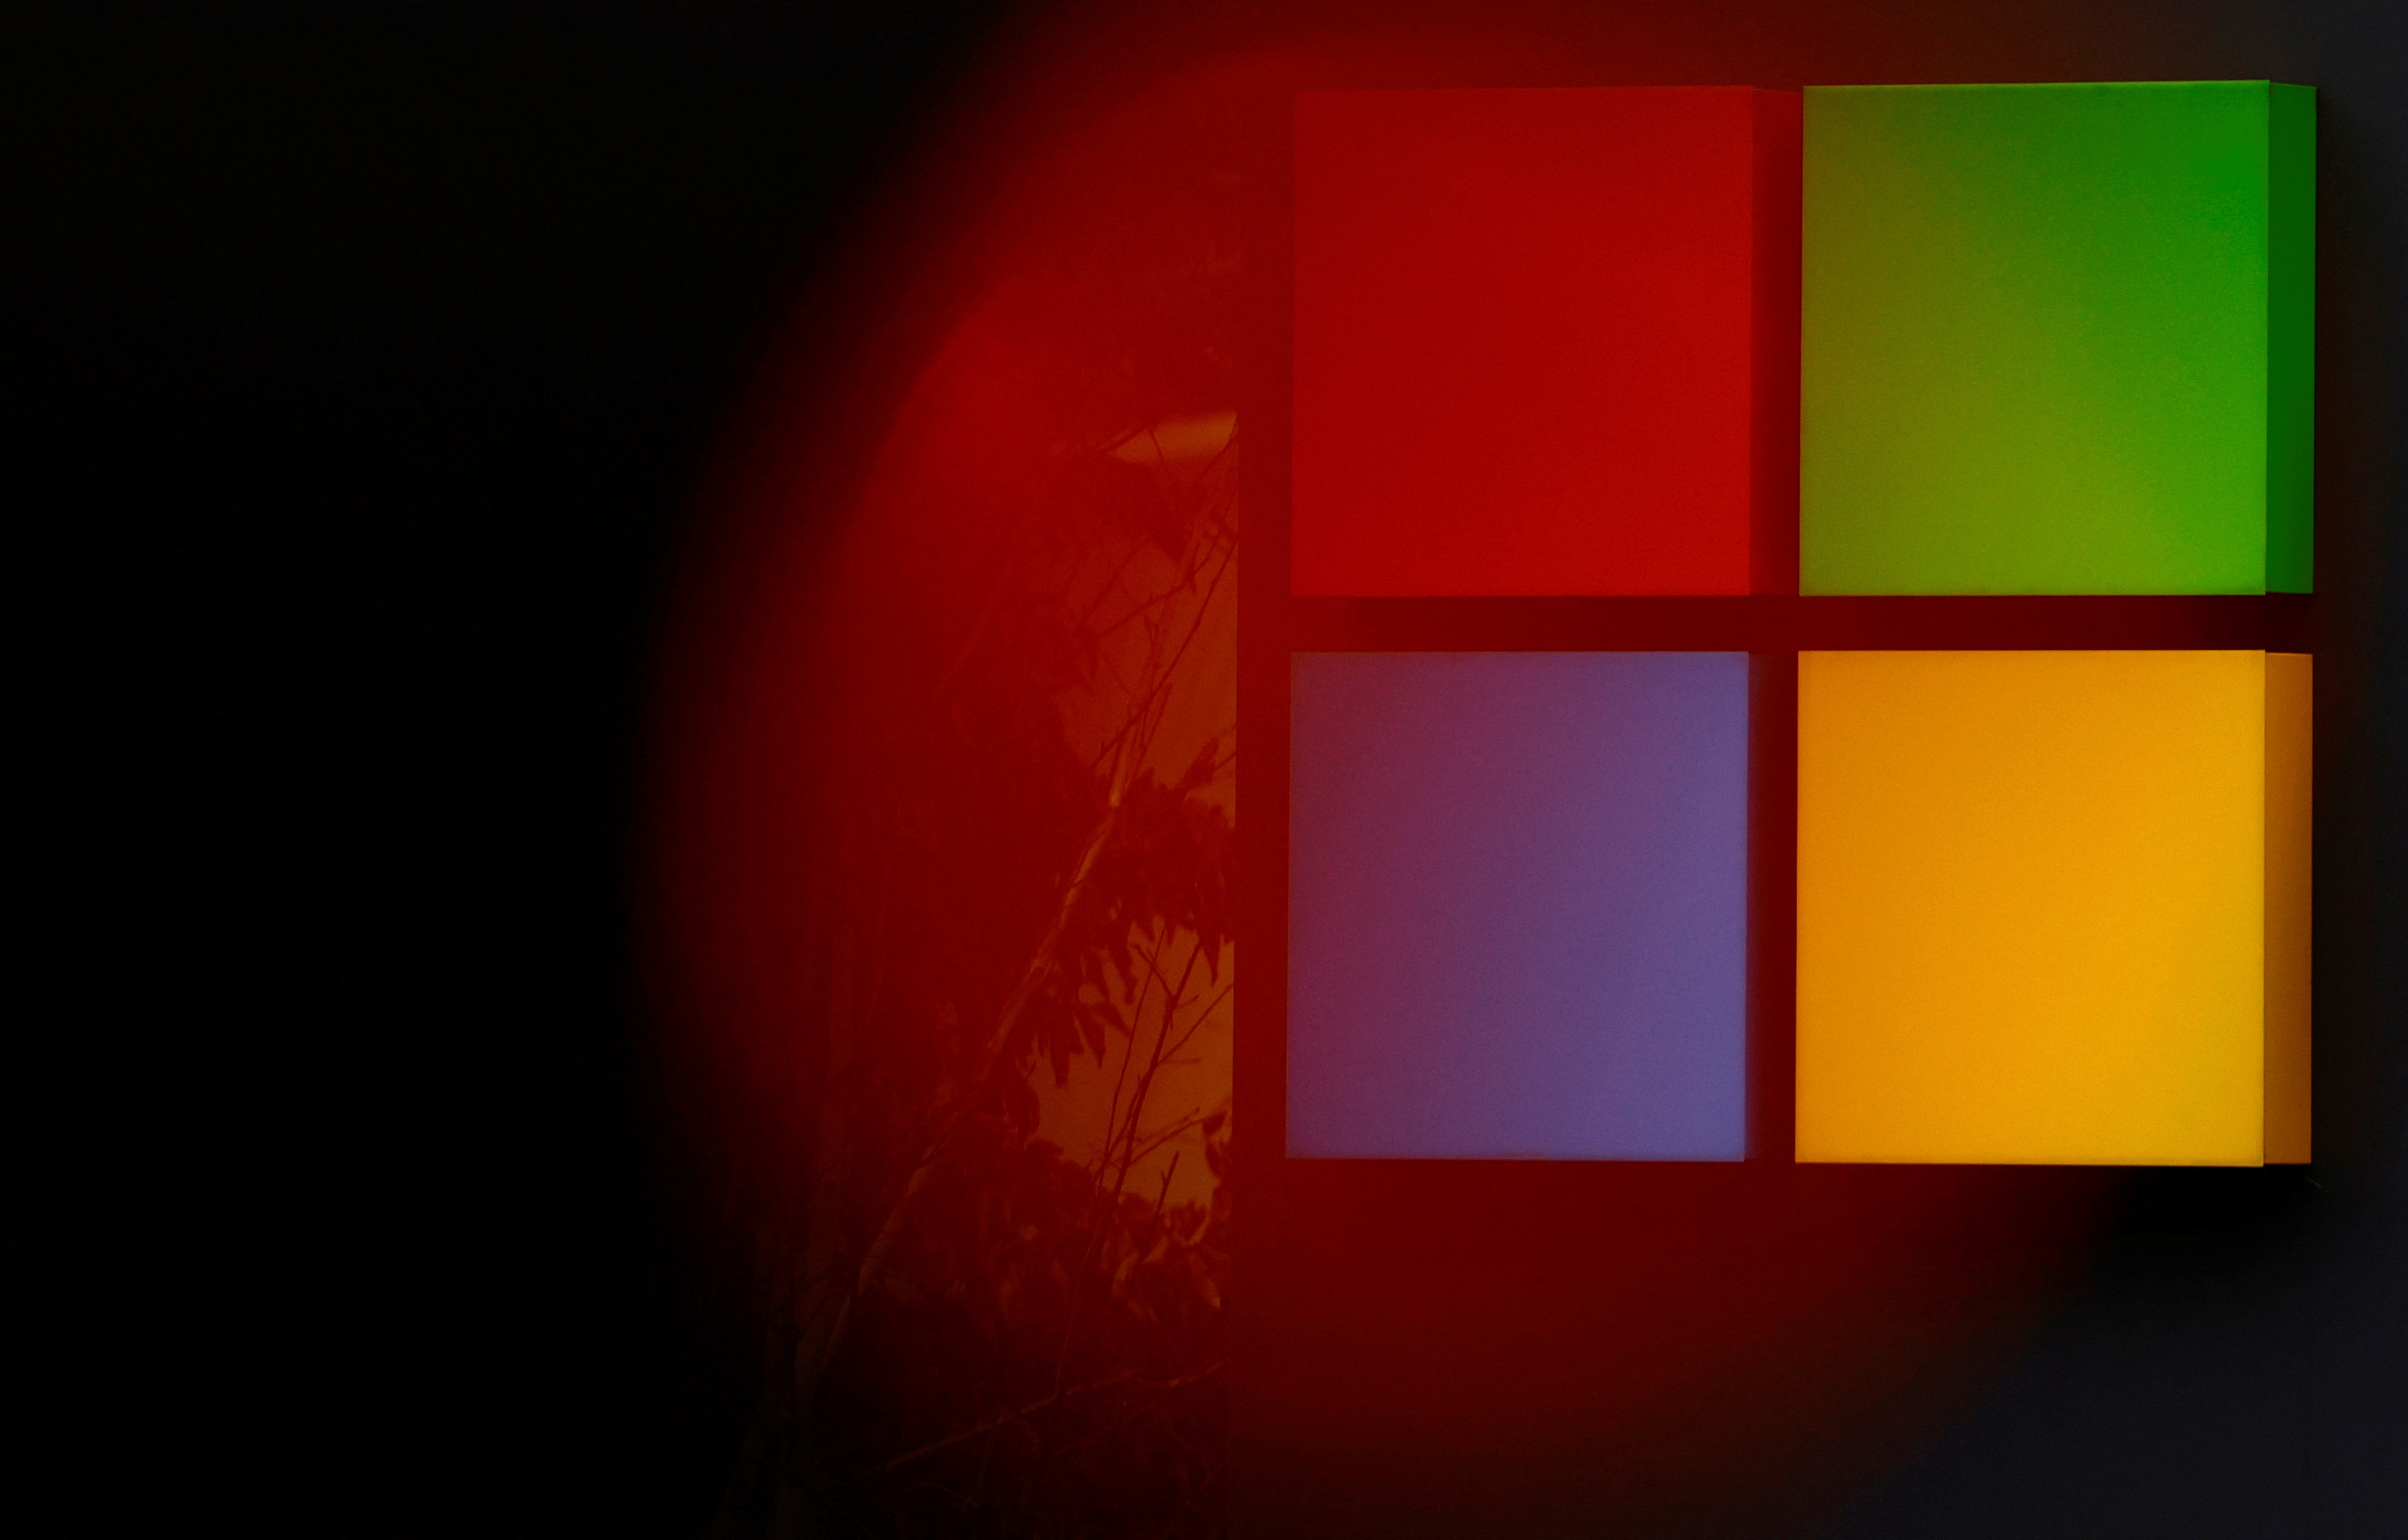 Microsoft ending support for Windows 10 could send 240 mln PCs to